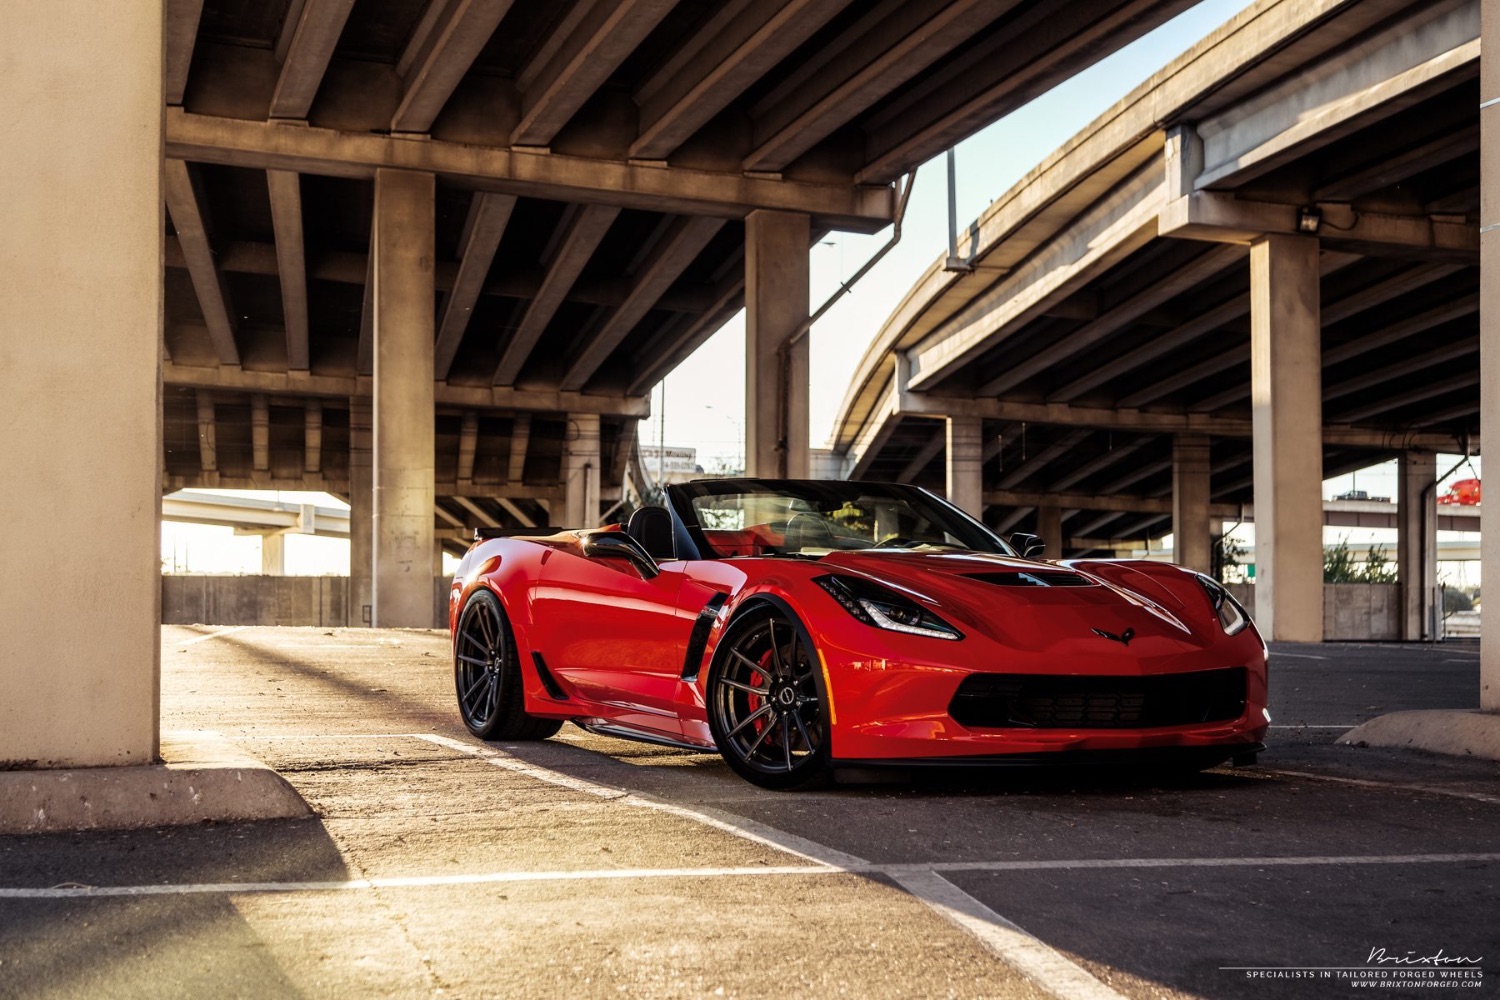 brixton-forged-wheels-red-corvette-c7-z06-wheels-convertible-brixton-forged-m53-ultrasport-1-piece-monoblock-concave-performance-forged-wheels-9-1800x1200